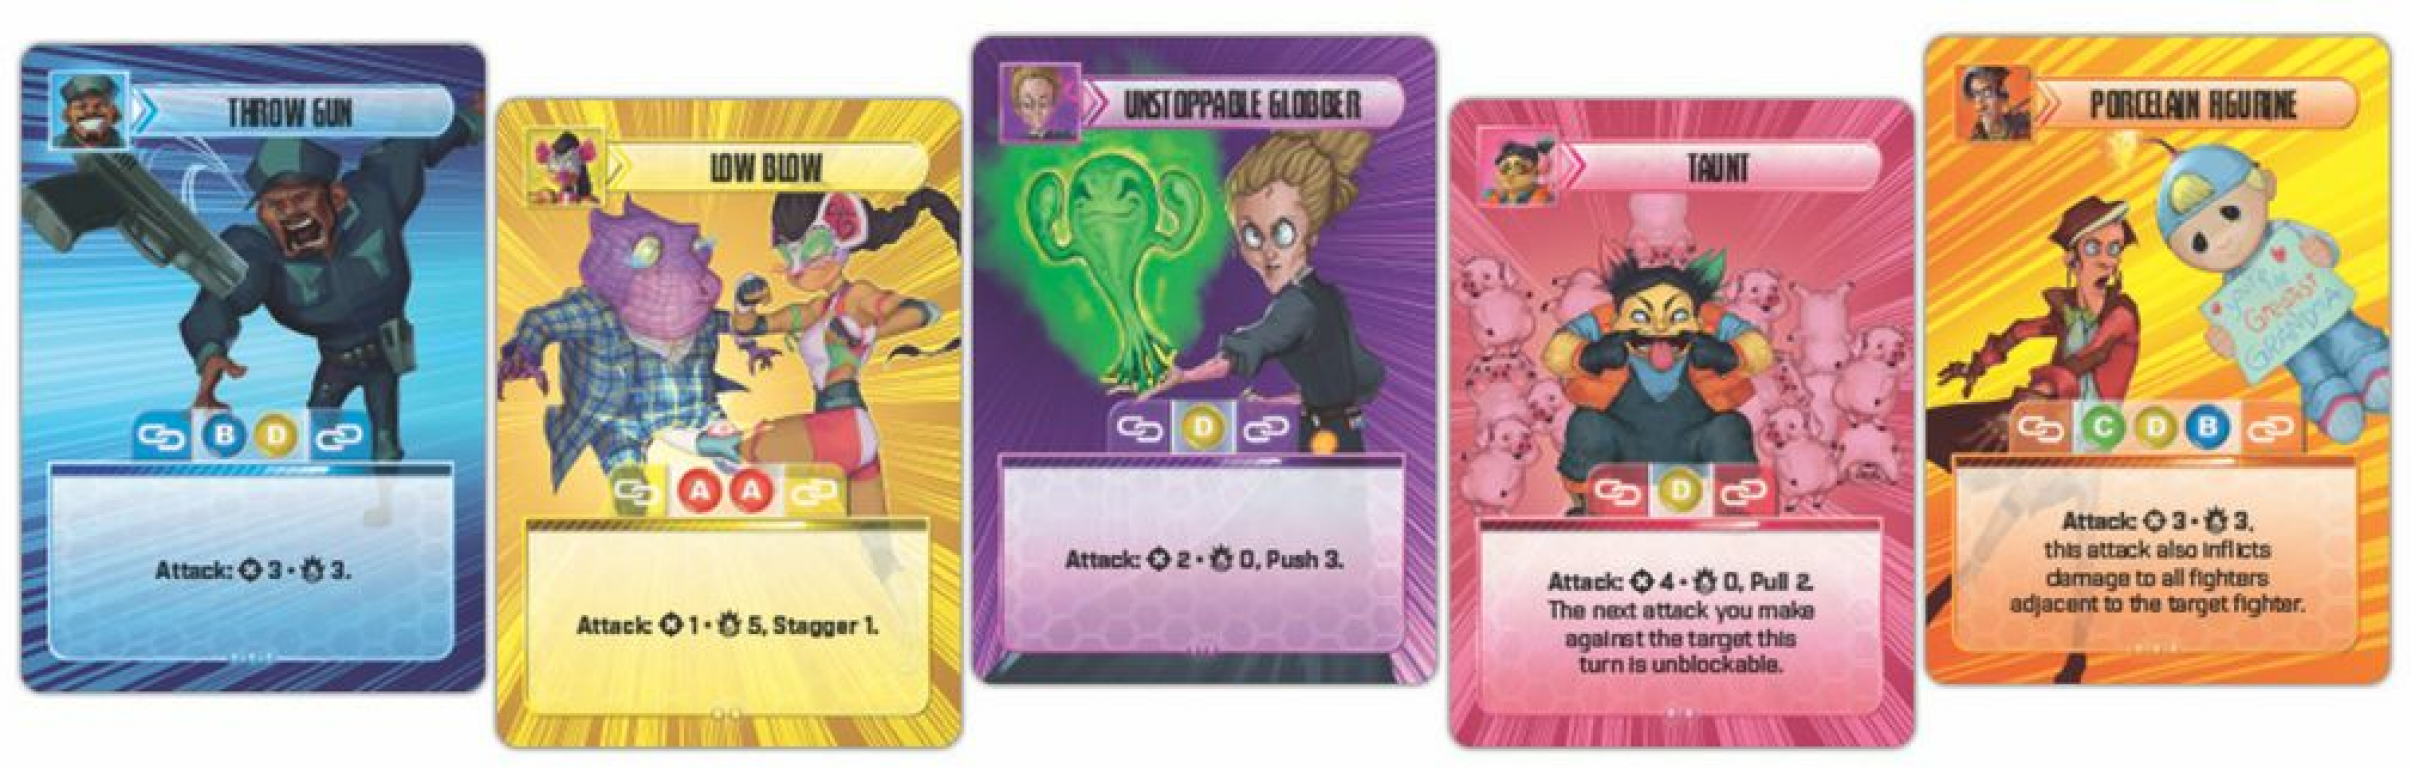 Super Punch Fighter cards